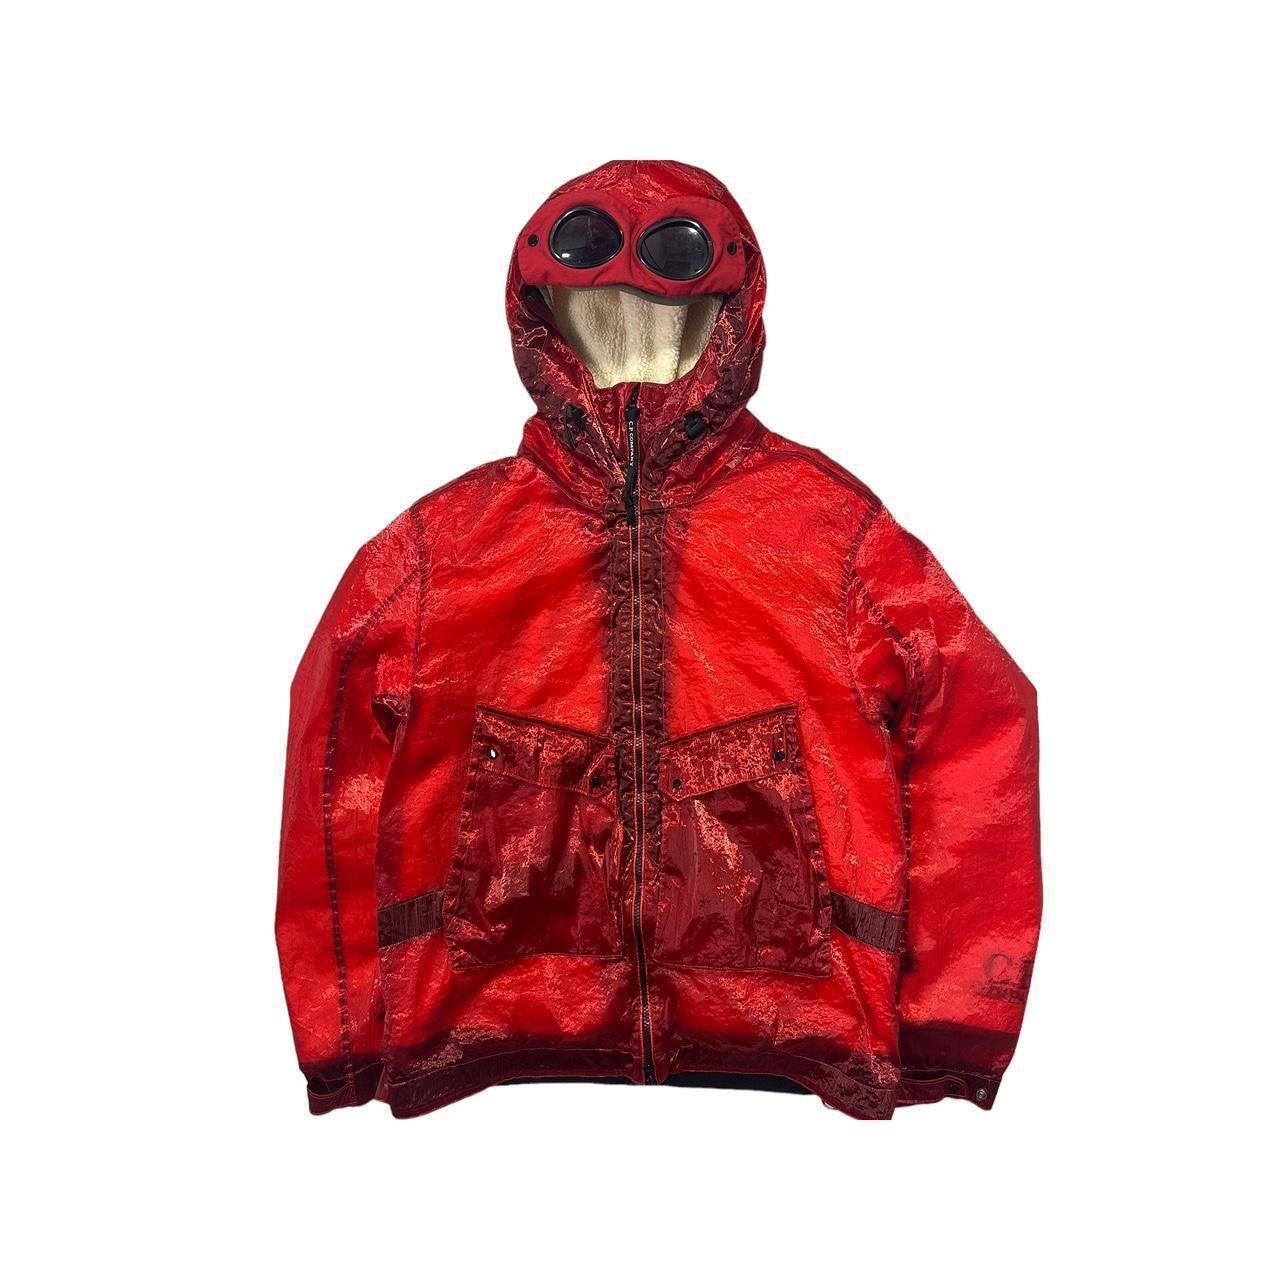 CP Company Kan D Zip Up Jacket with Sheep Skin Inner - Known Source